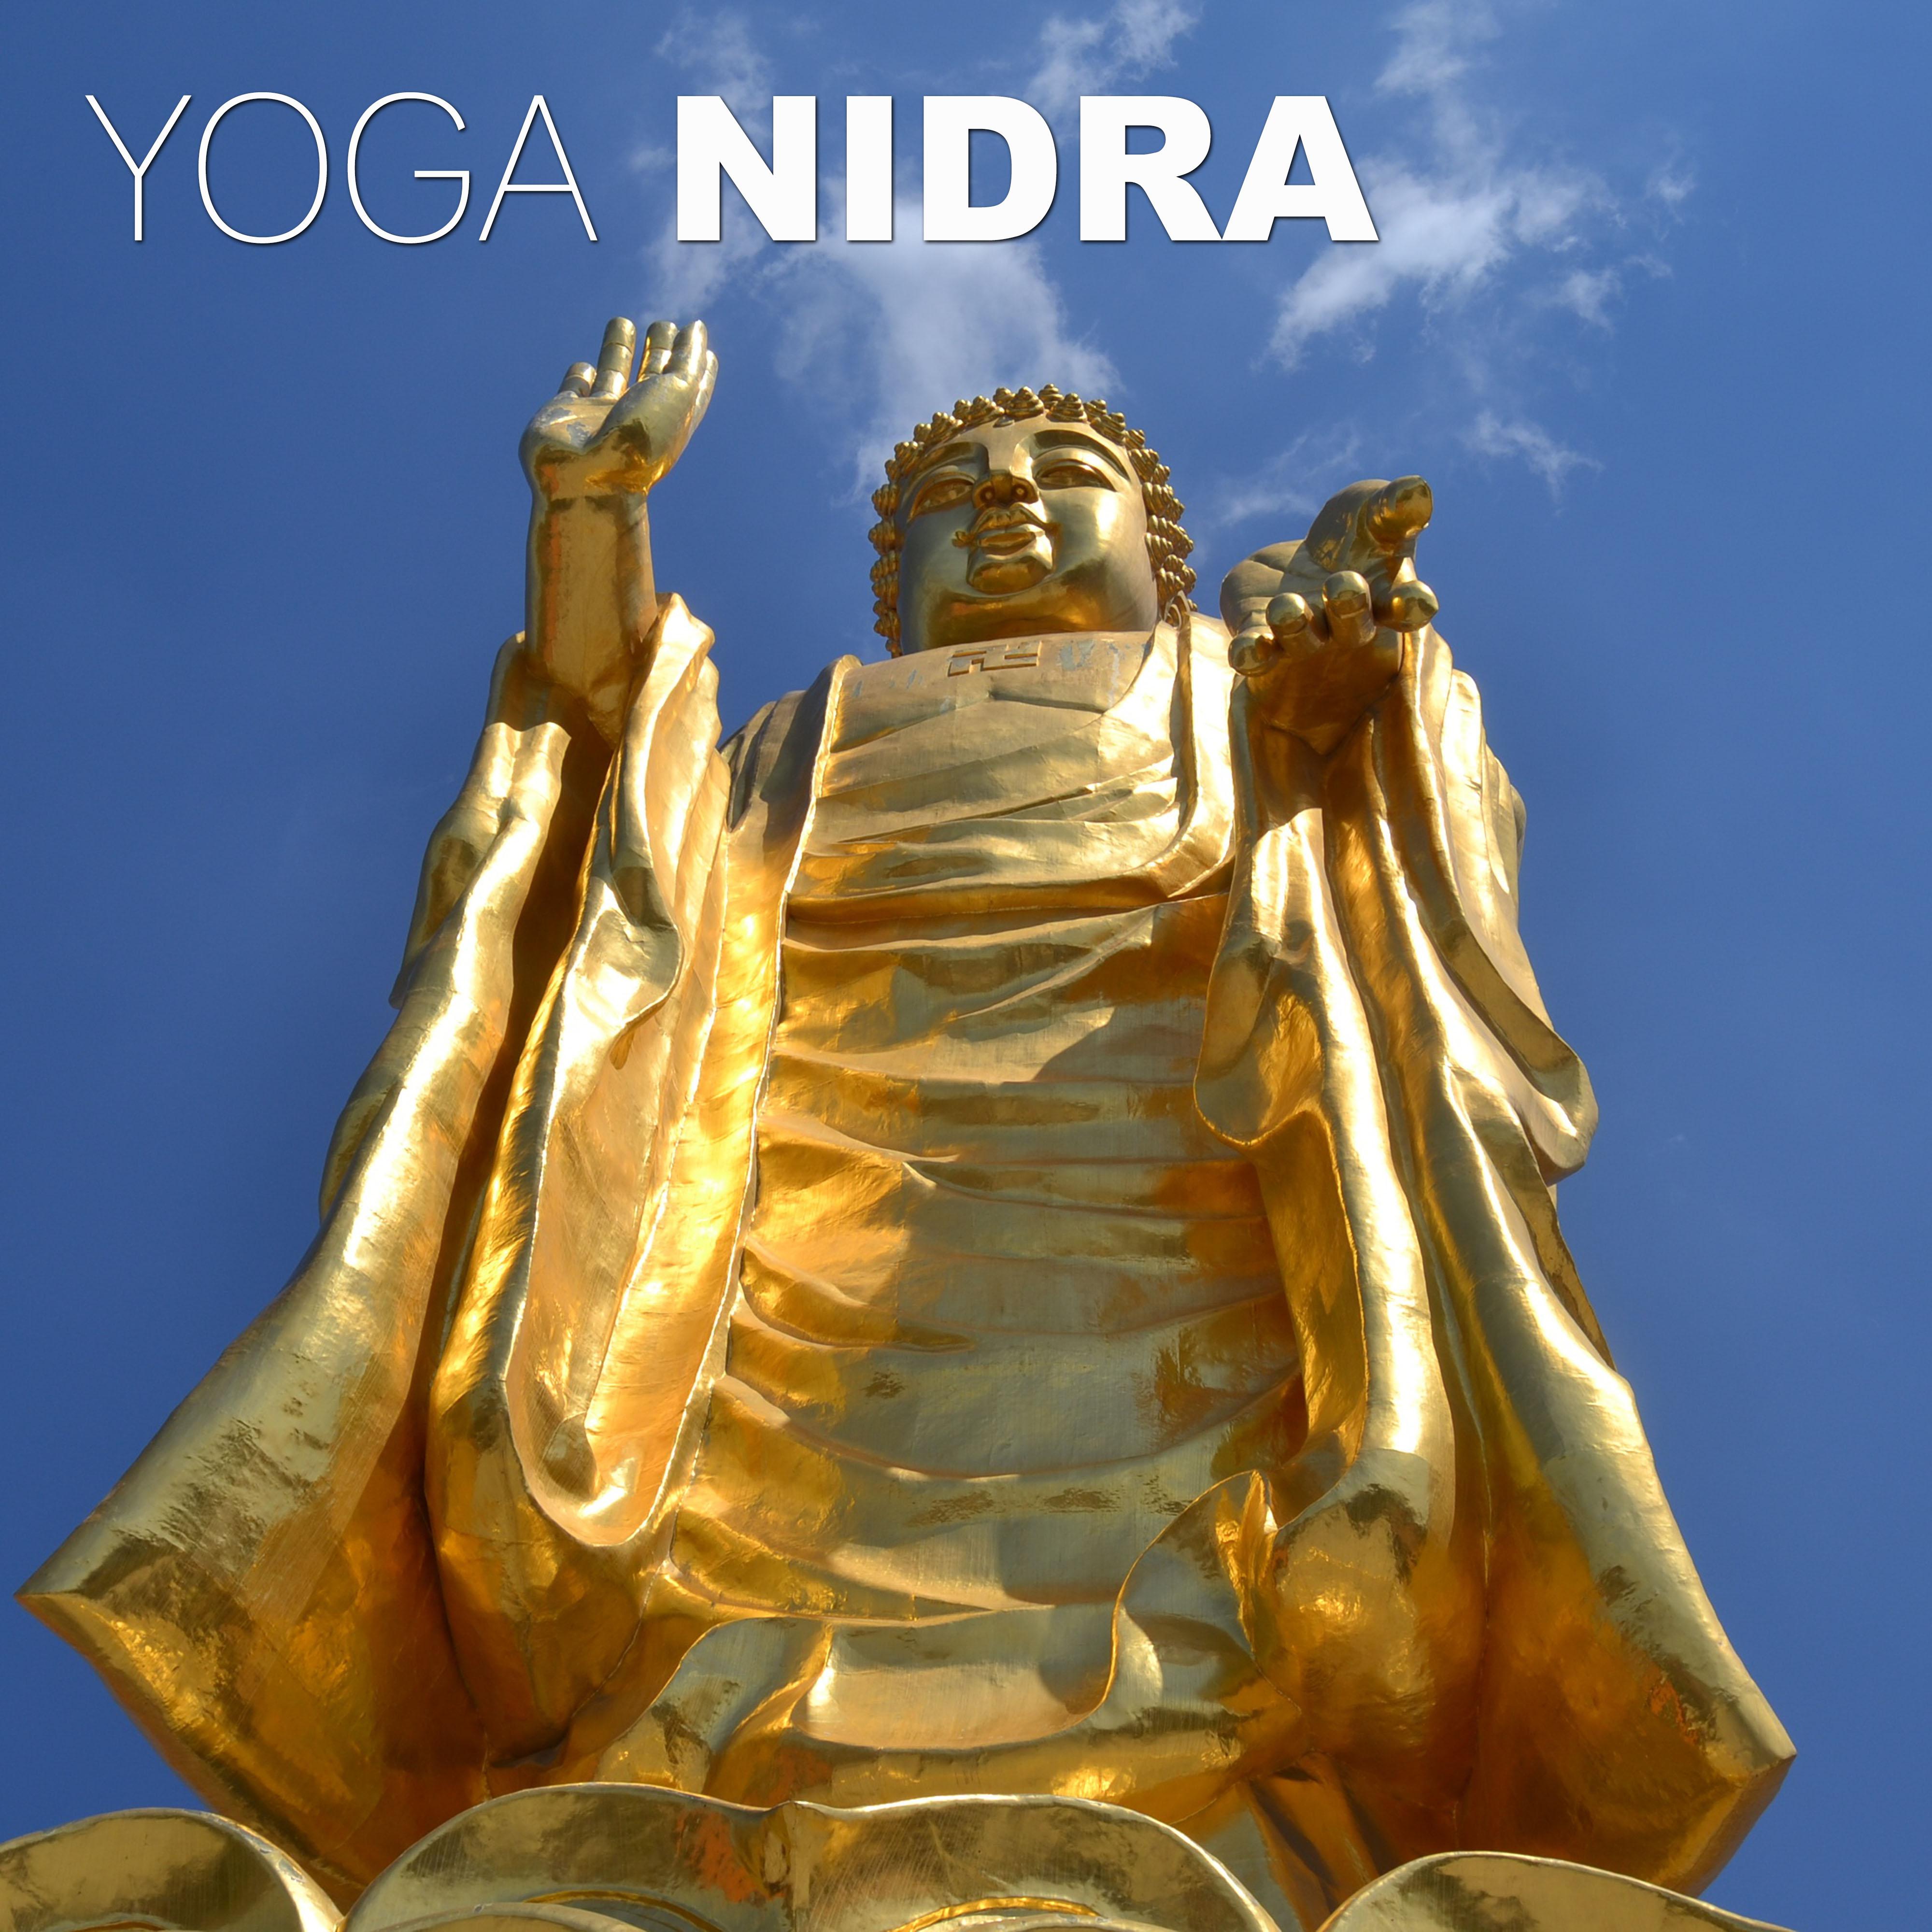 Yoga Nidra - Healing Zen Music, Meditation, Deep Relax, Therapy for Sleep, New Age Music, Calm Nature Sounds